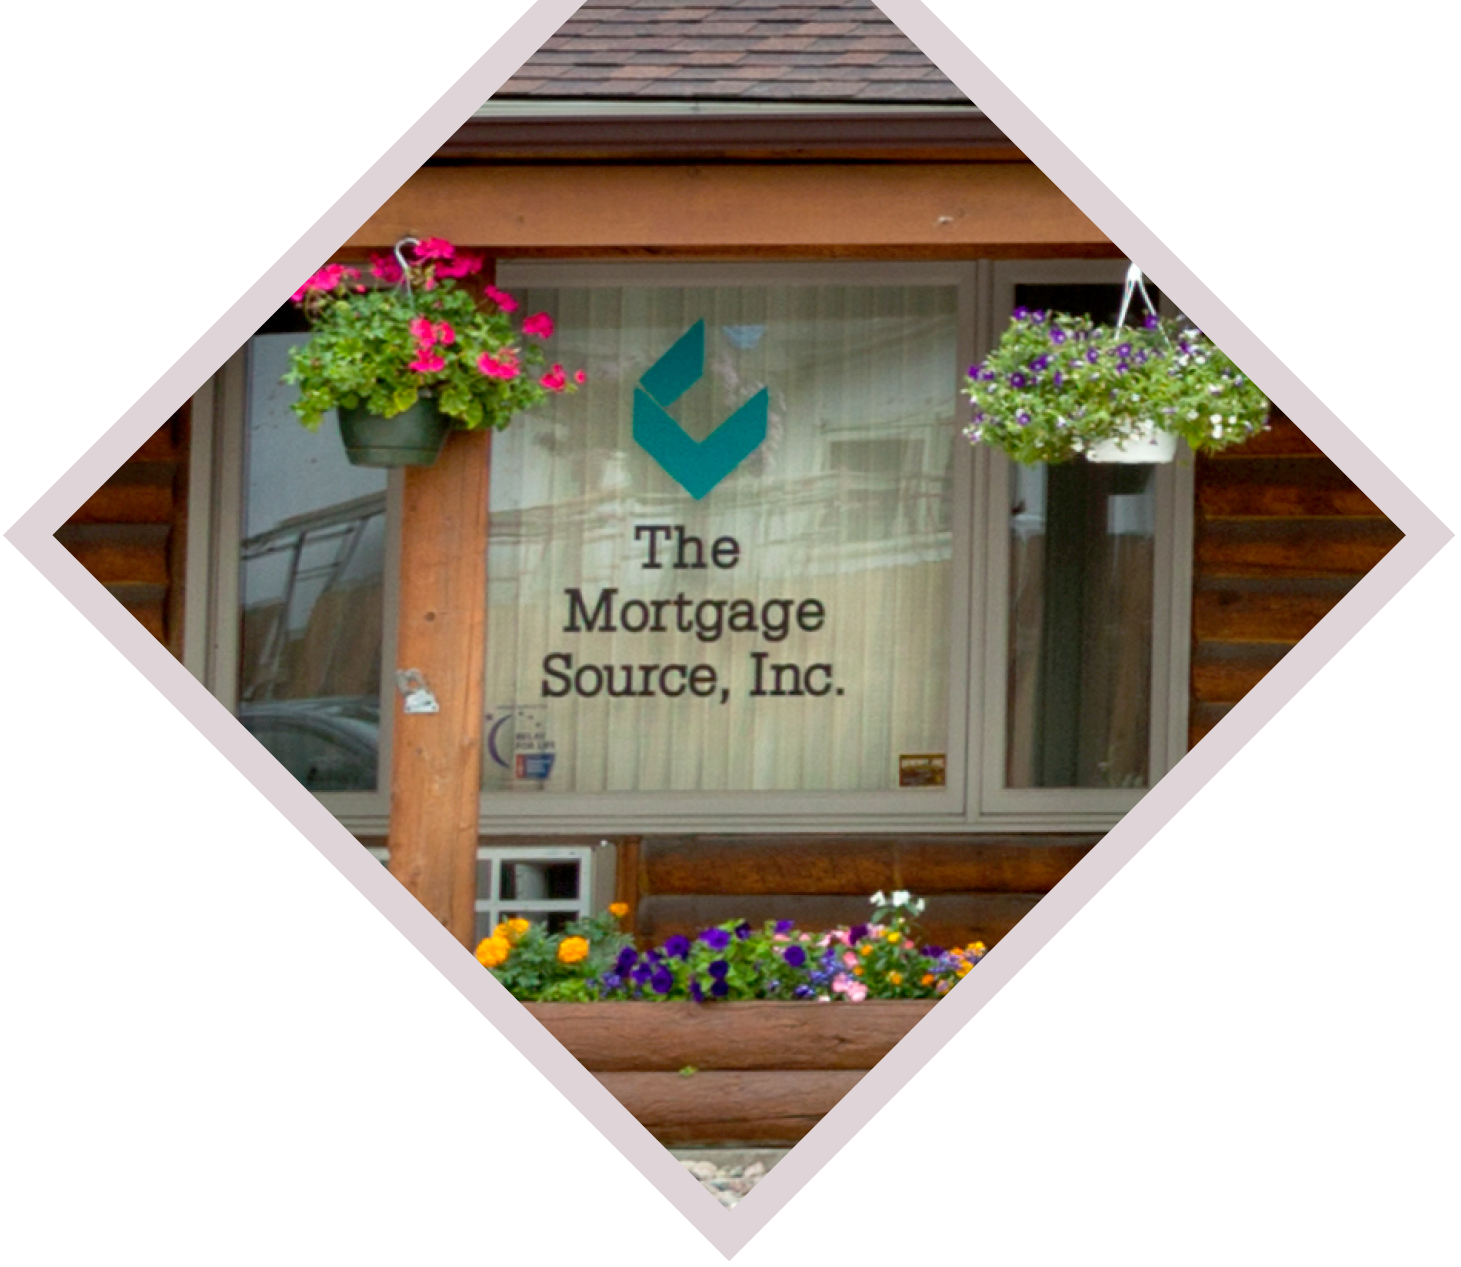 The Mortgage Source building